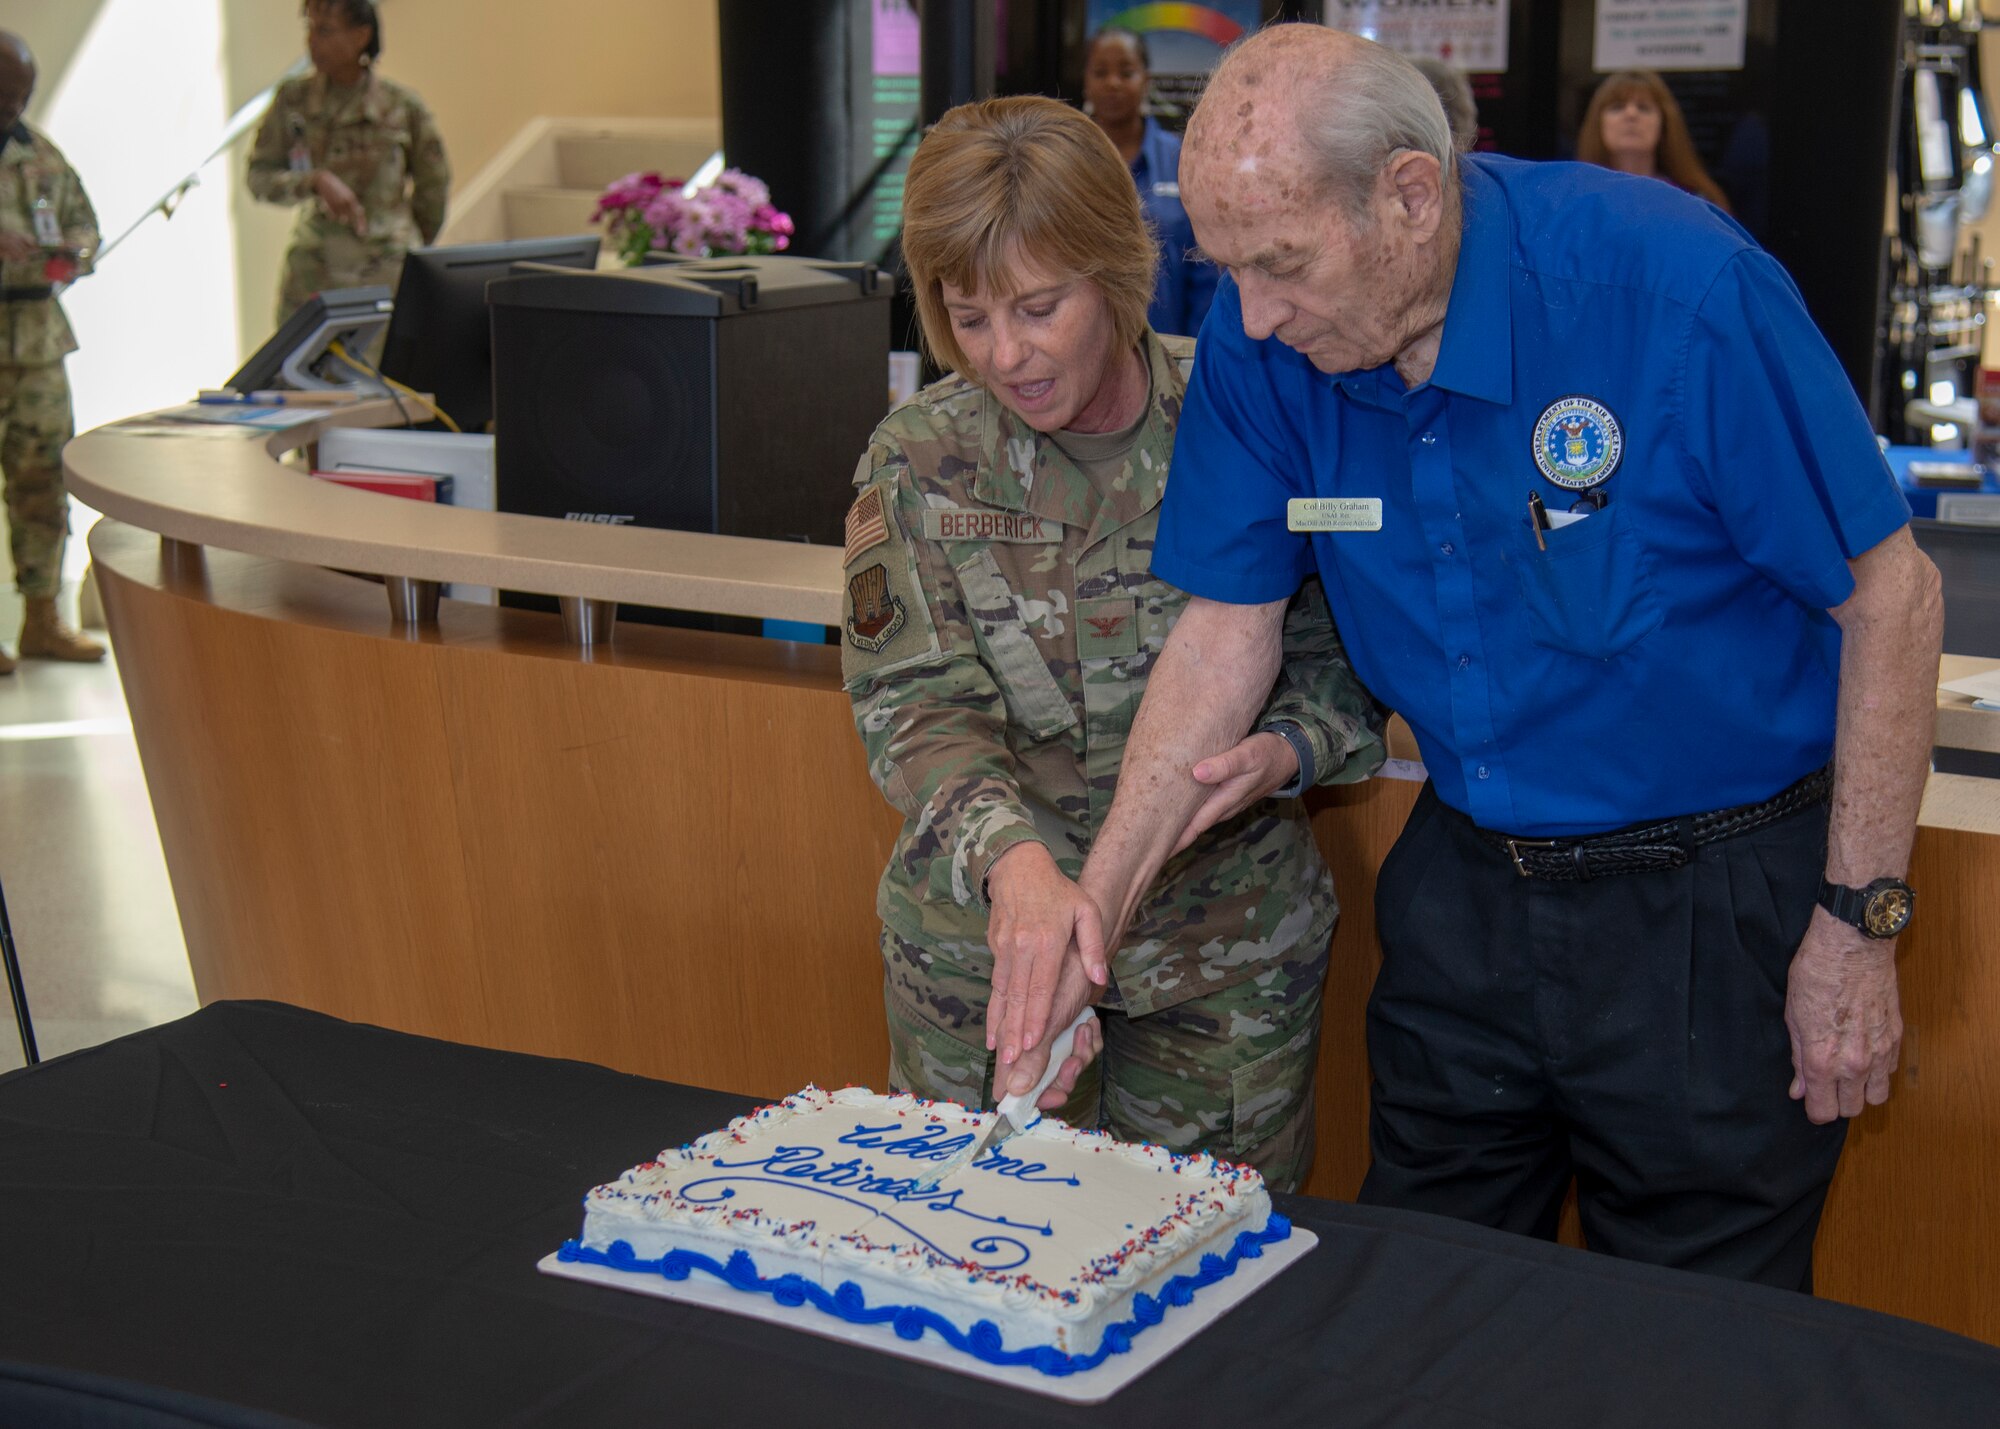 U.S. Air Force Col. Christine Berberick, the 6th Medical Group commander, cuts a ceremonial cake with retired Col. William Graham, the MacDill Retiree Activities Office director, at the Retiree Appreciation Day event Feb. 22, 2020, at MacDill Air Force Base, Fla.